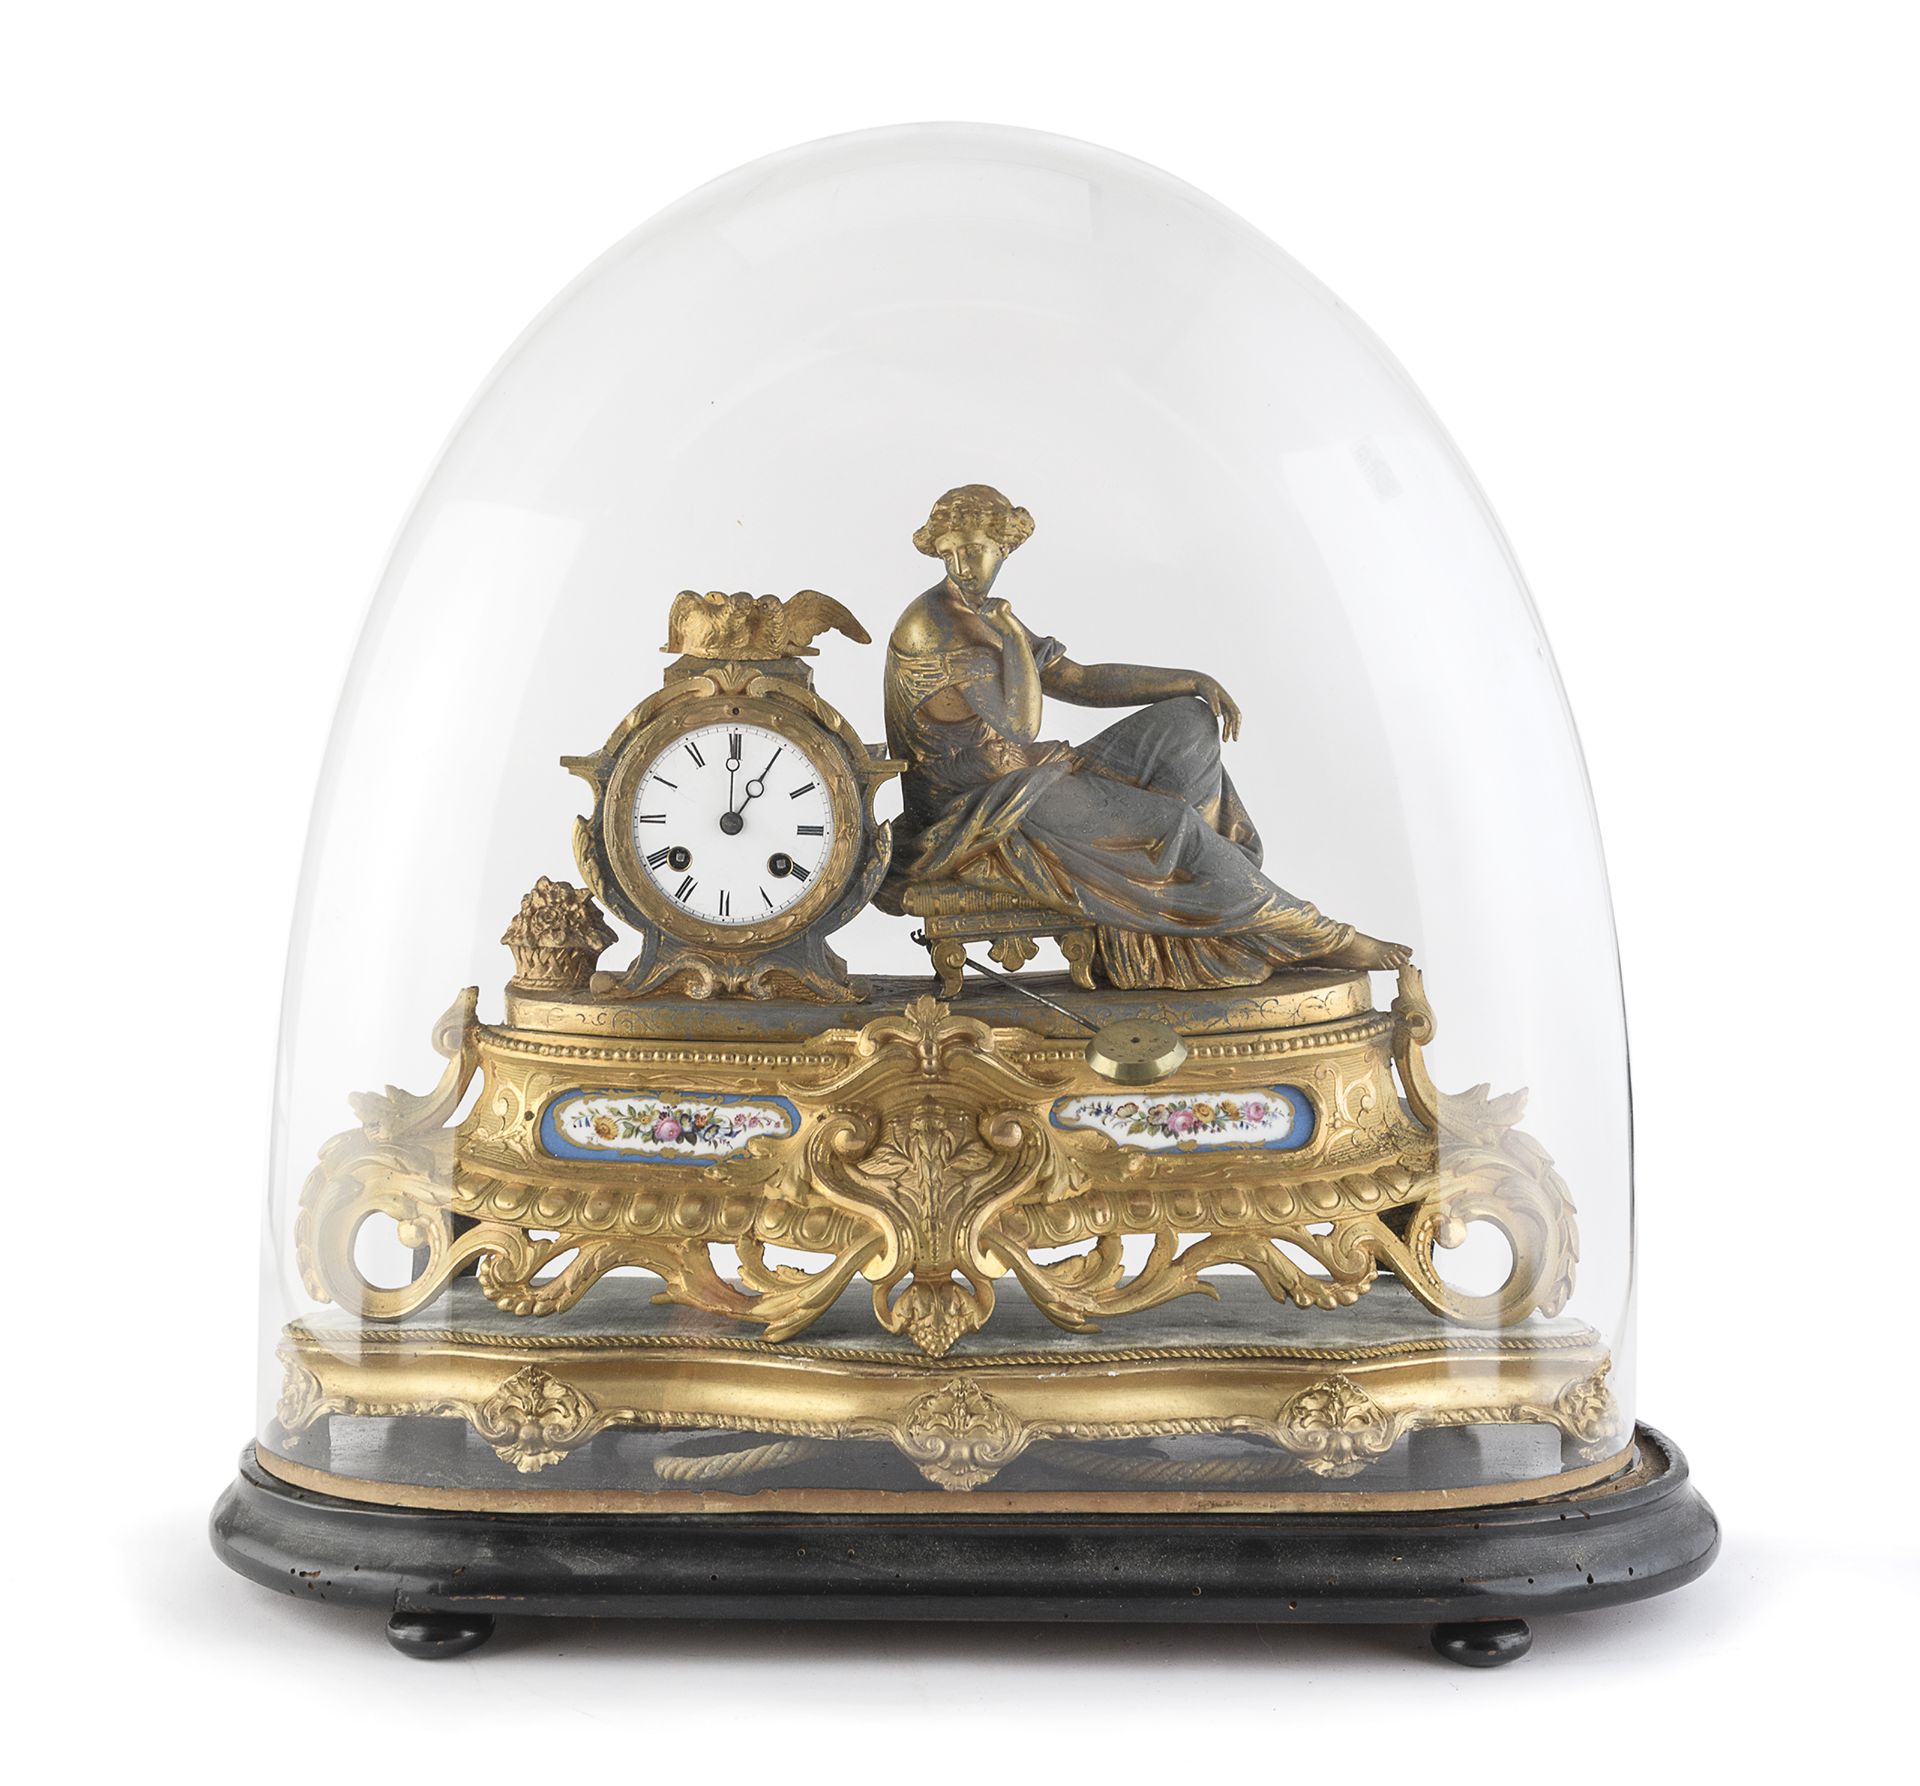 TABLE CLOCK WITH SEVRES PORCELAIN 19th CENTURY